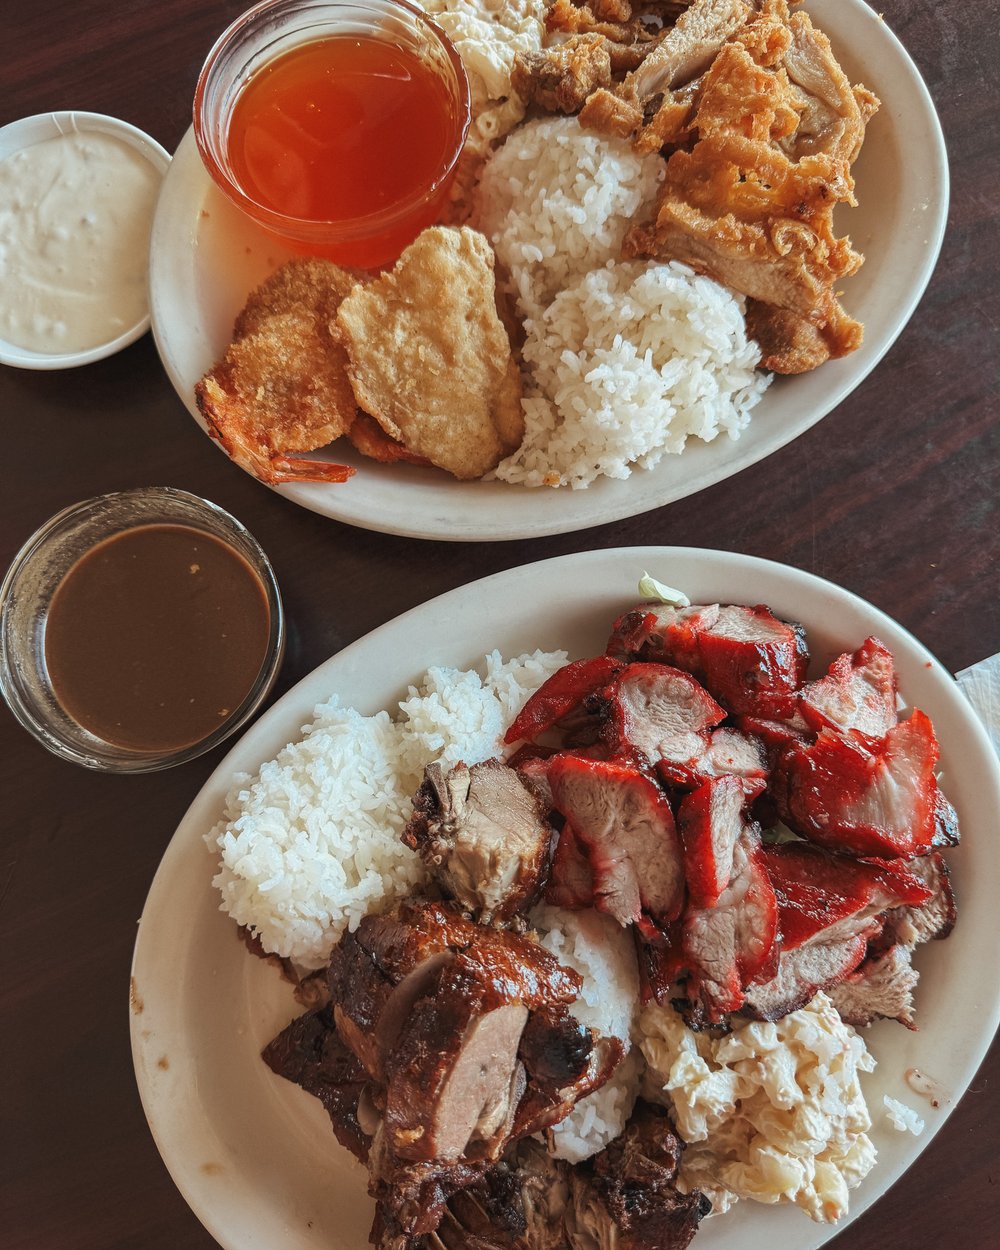  Huge, delicious portions at  Garden Island BBQ &amp; Chinese Restaurant  